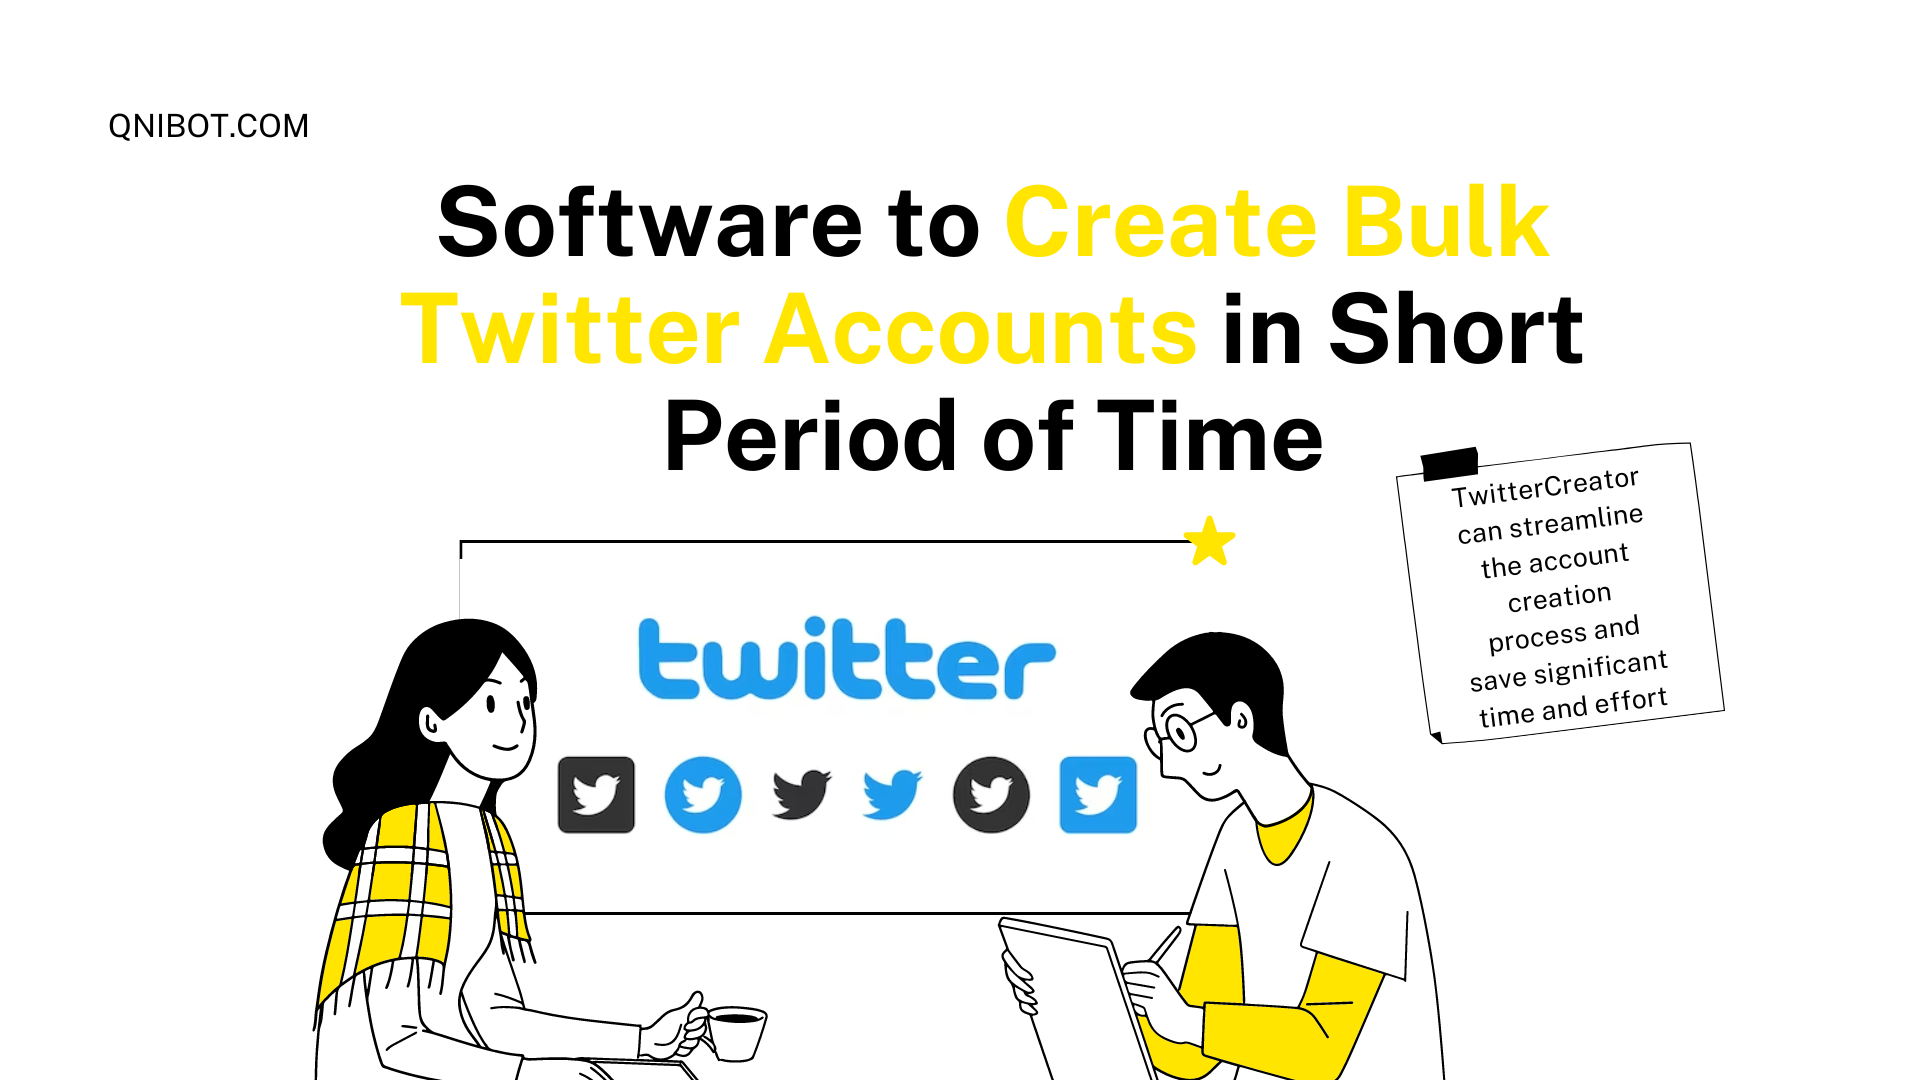 Any One Knows About Any Software to Create Bulk Twitter Accounts in Short Period of Time?